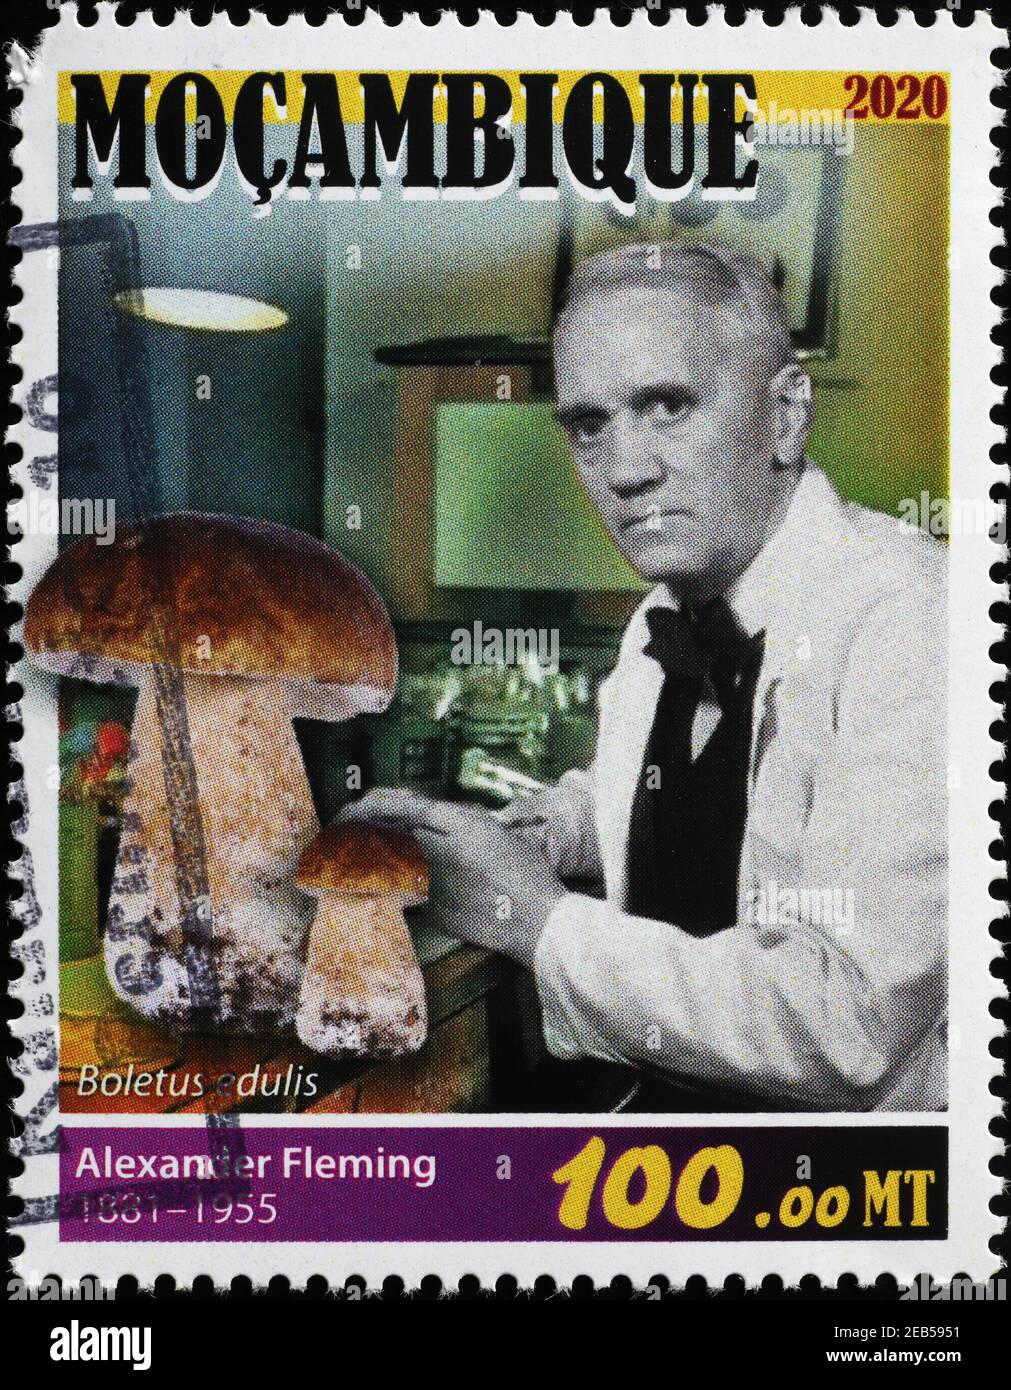 Portrait of Alexander Fleming on stamp of Mozambique Stock Photo